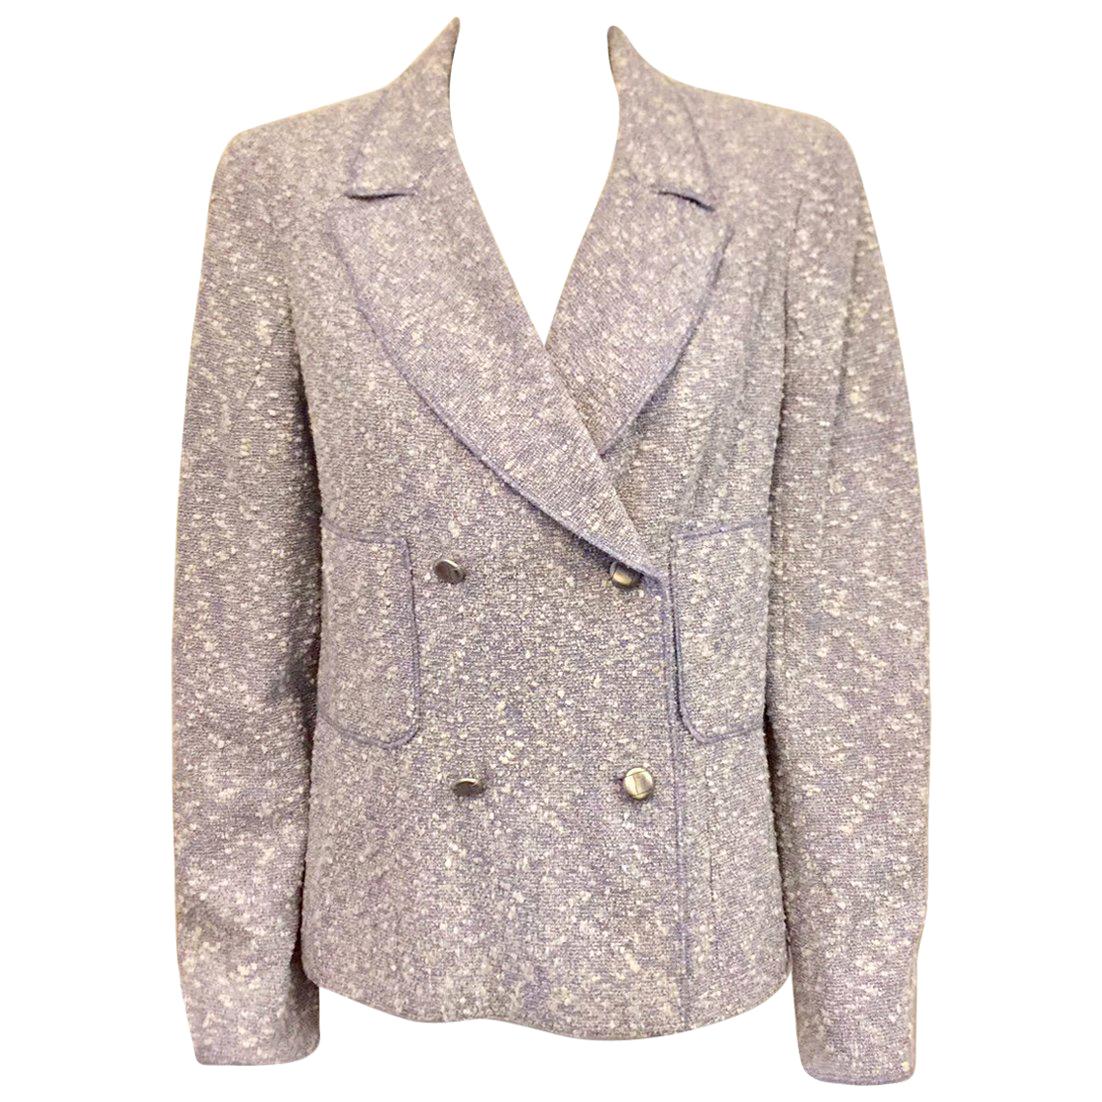 Chanel Spring Cotton/Wool Tweed Blend Pale Lavender Double Breasted Jacket 